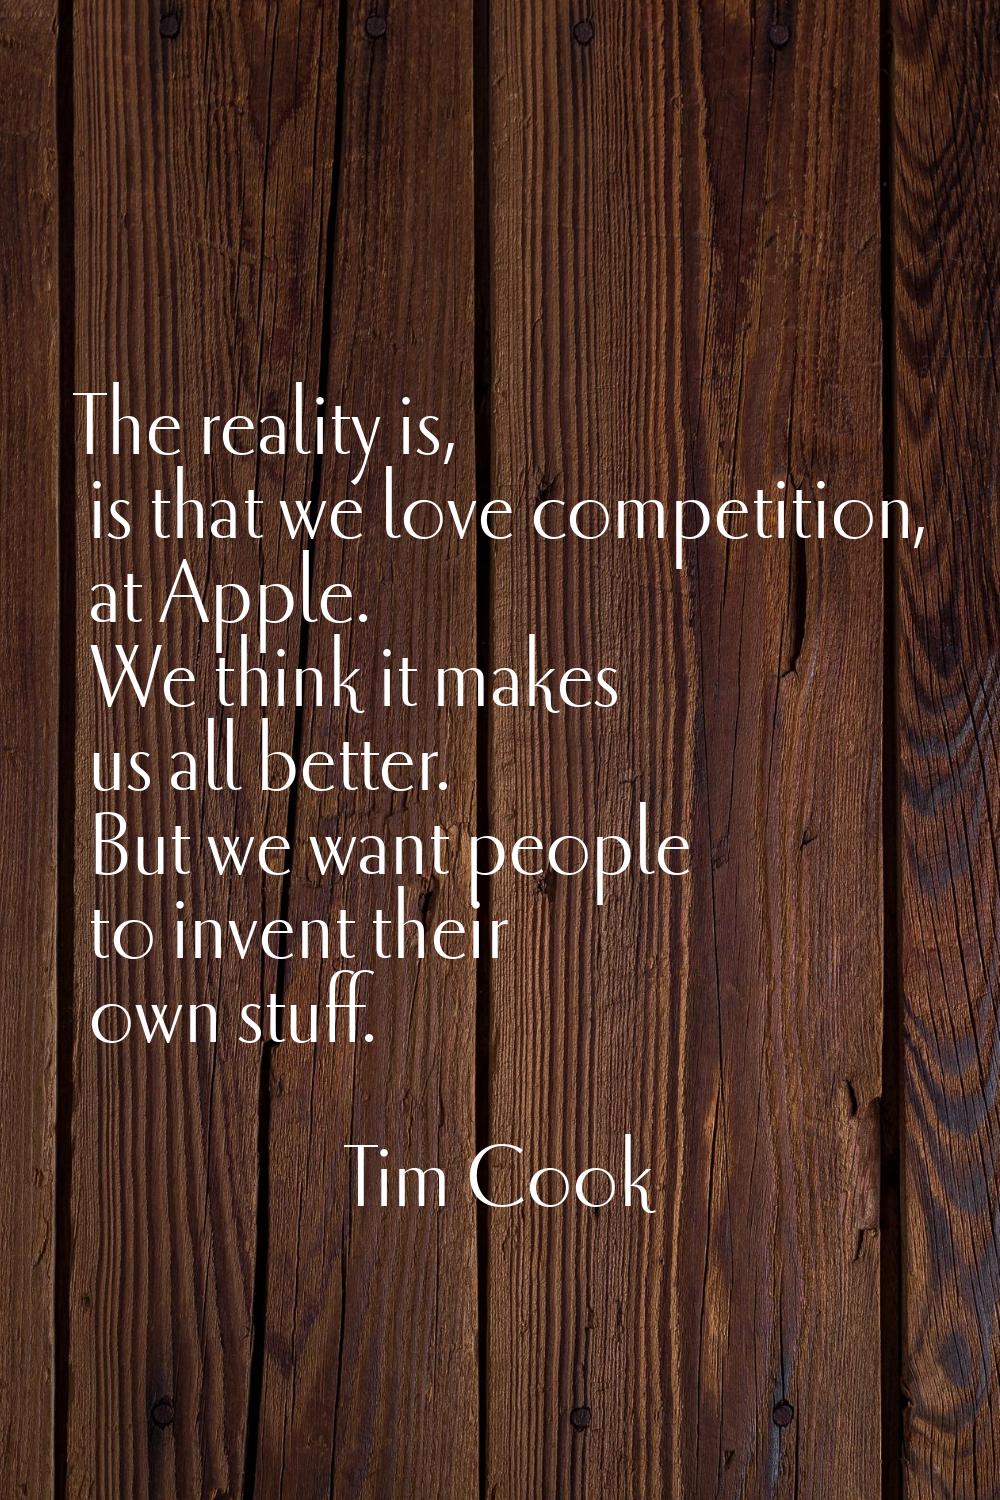 The reality is, is that we love competition, at Apple. We think it makes us all better. But we want